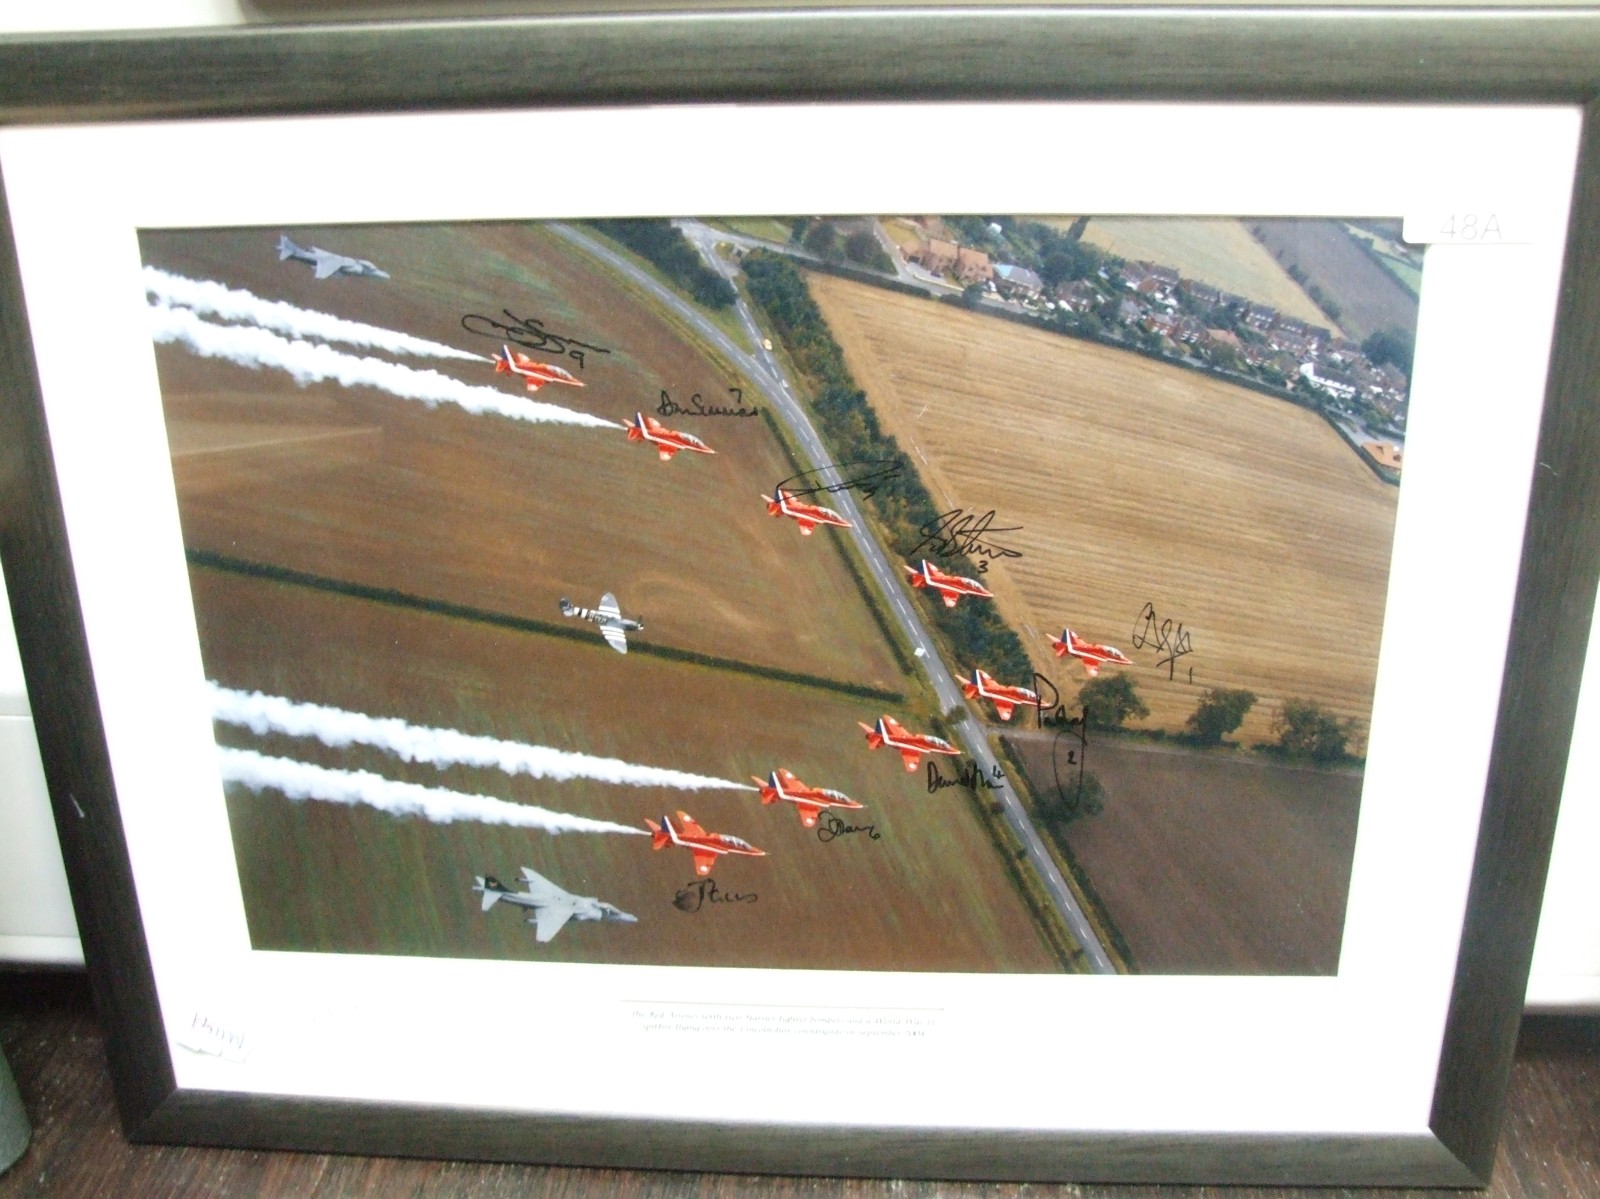 A limited edition photograph, The Red Arrows, signed by the pilots